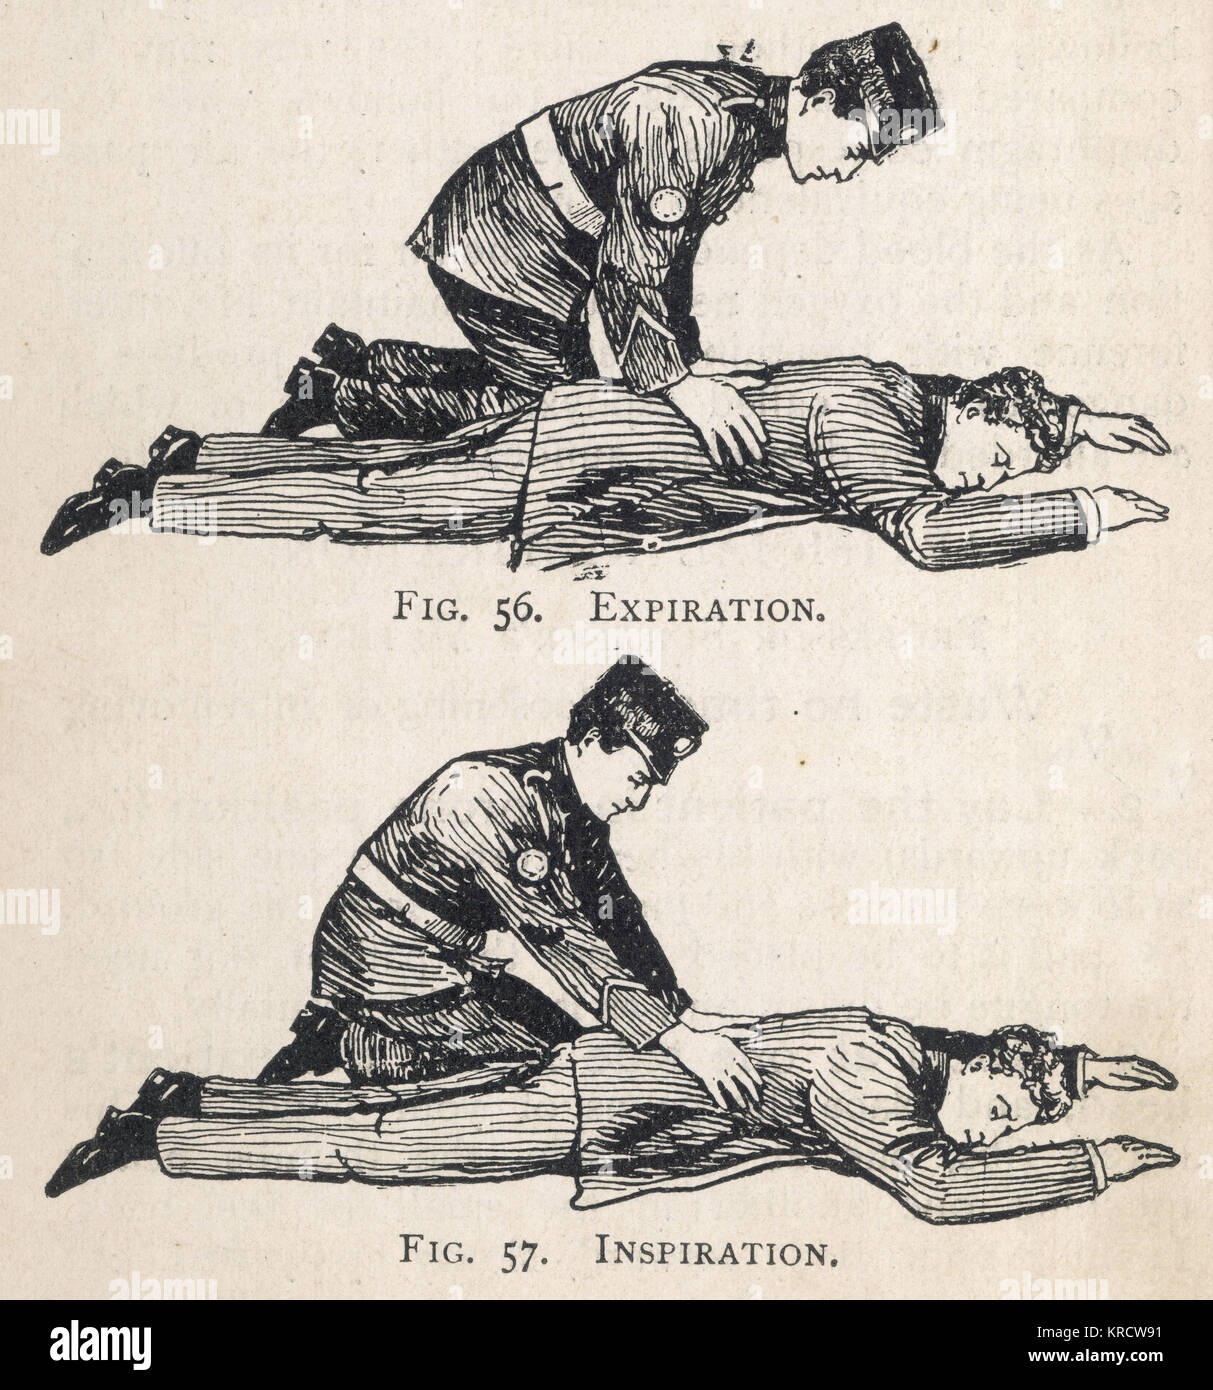 First aid diagram, illustrating artificial respiration -- Professor Schafer's Method, with expiration (above) and inspiration (below). Date: 1908 Stock Photo